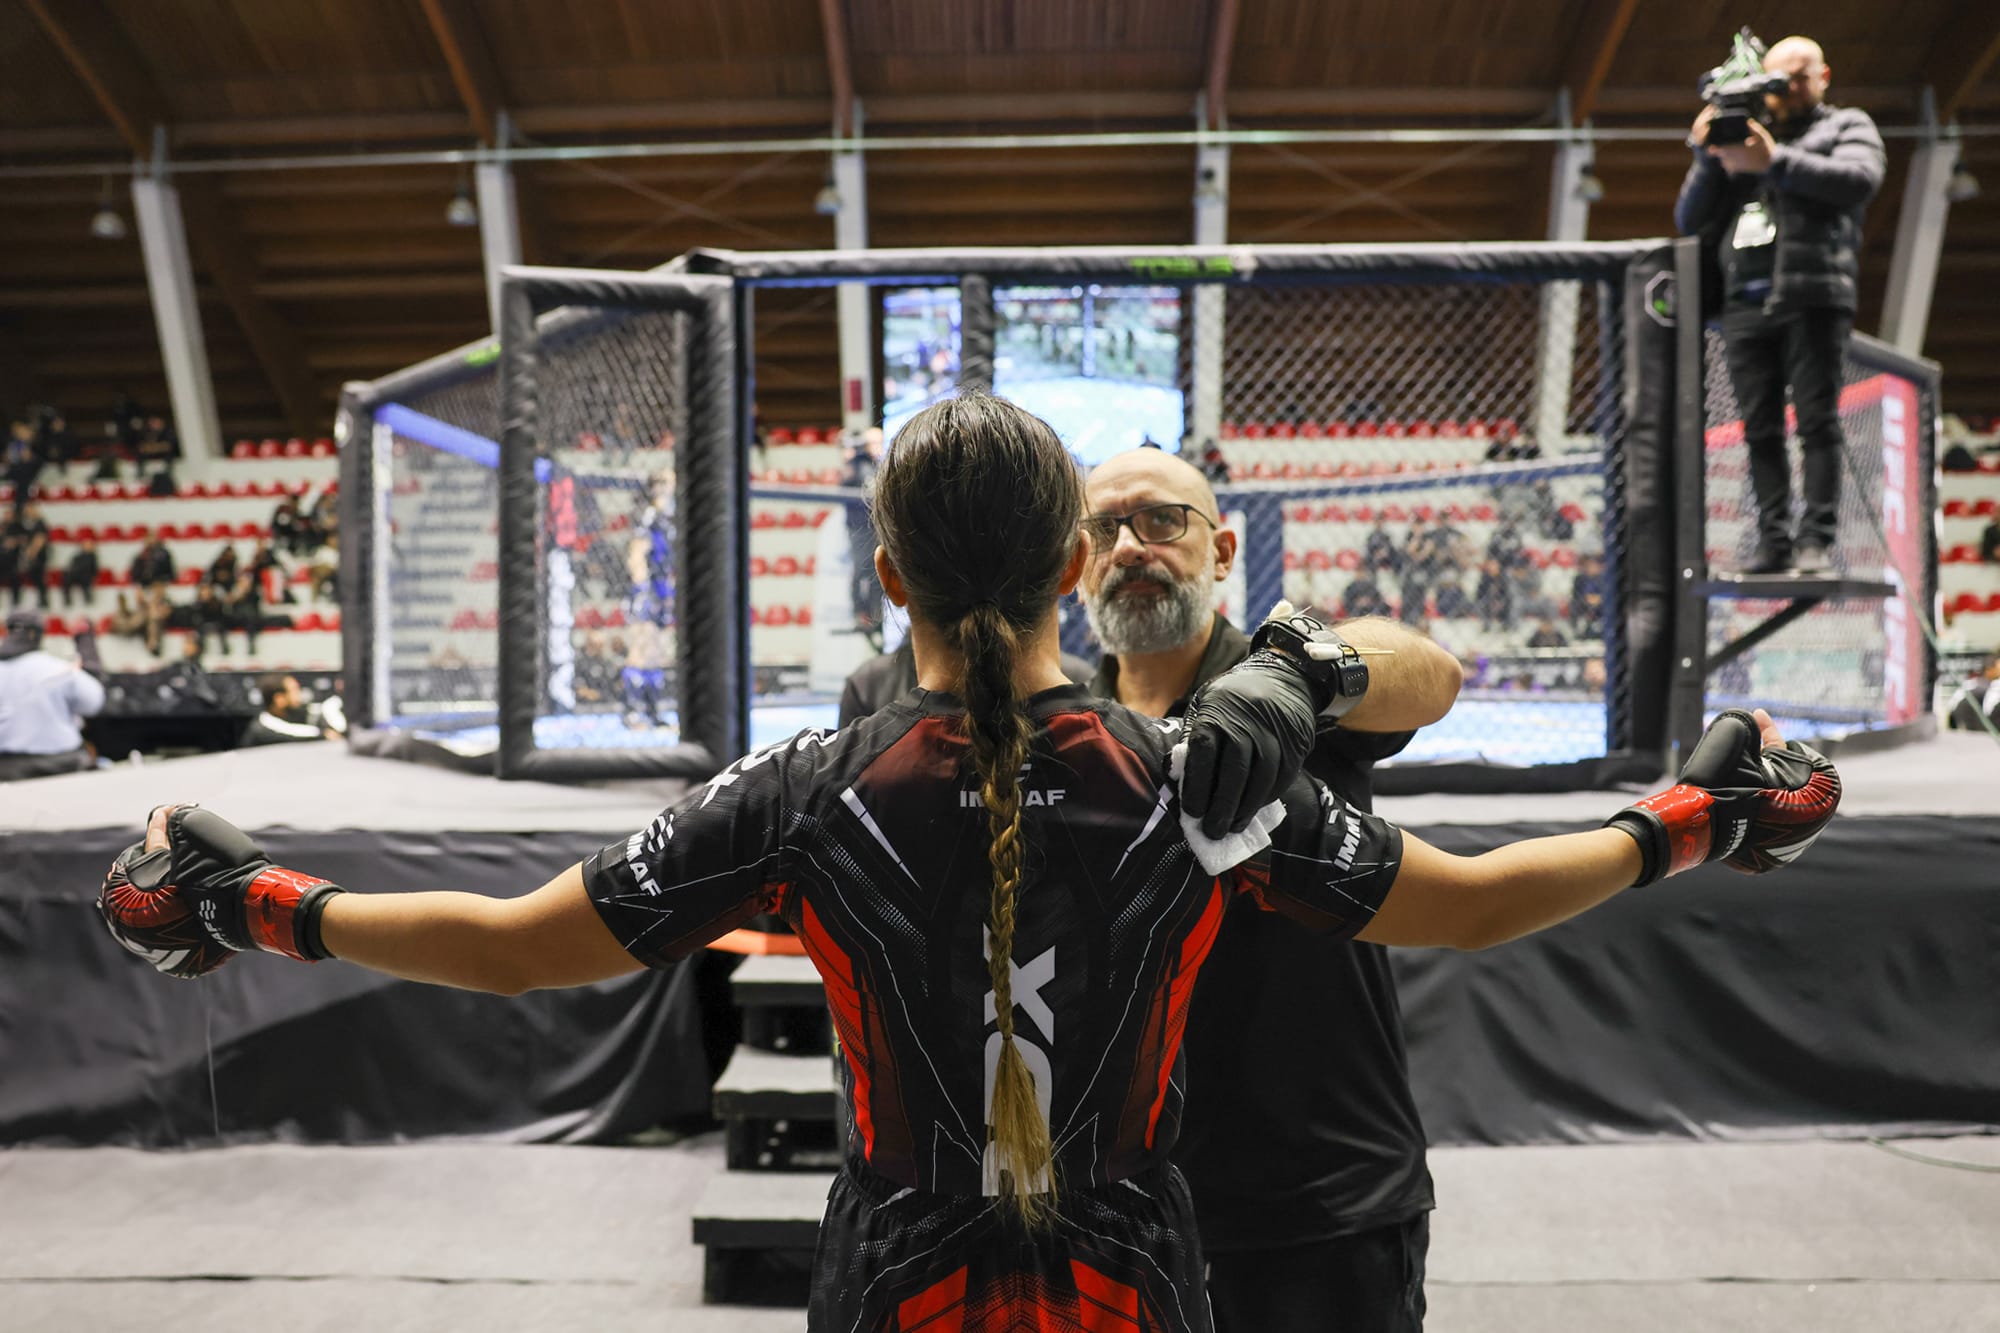 IMMAF Provide National Federations With Latest Safeguarding Requirements